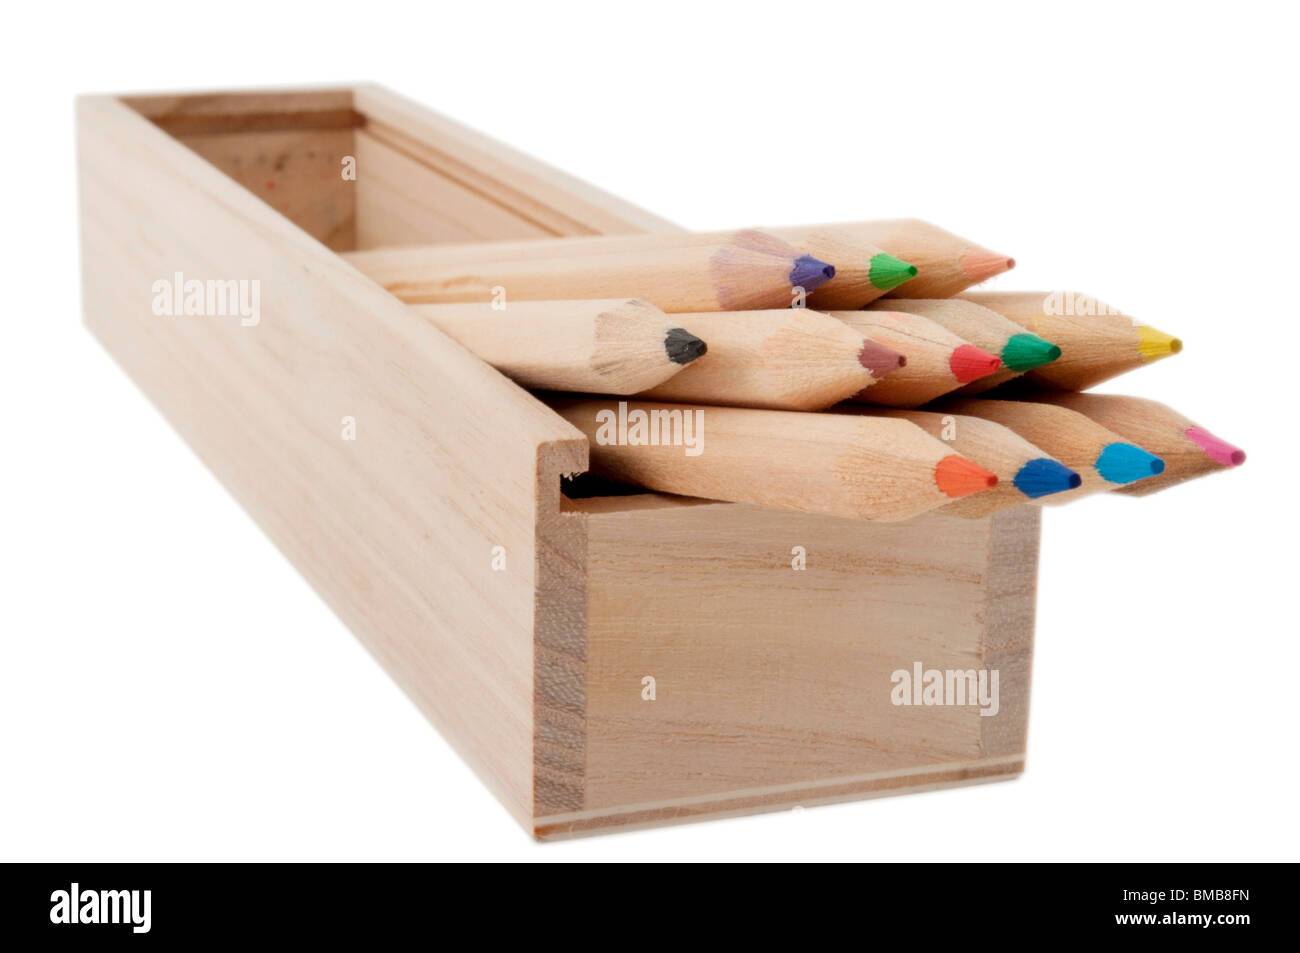 My Old Wooden Pencil Box, full of colored pencils Stock Photo